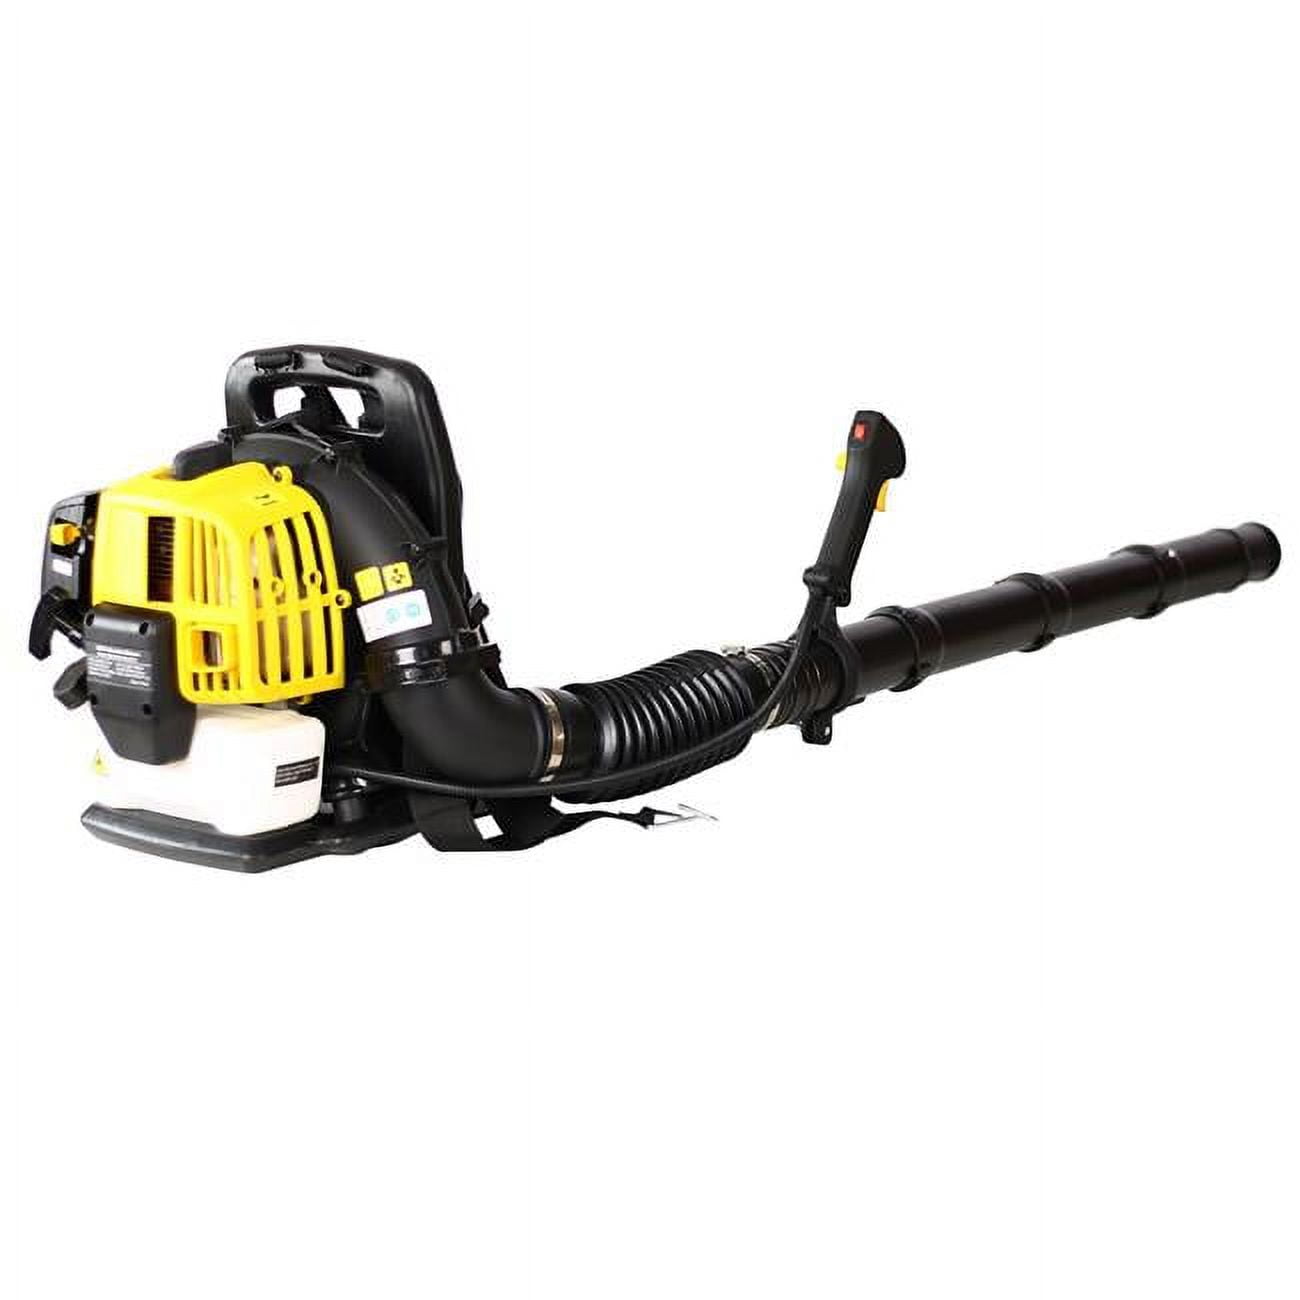 Picture of Direct Wicker UBS-W46537643 52cc 2-Cycle Engine Backpack Blower&#44; Gas Leaf Blower with Extention Tube for Blowing Leaves and Dust (Yellow)